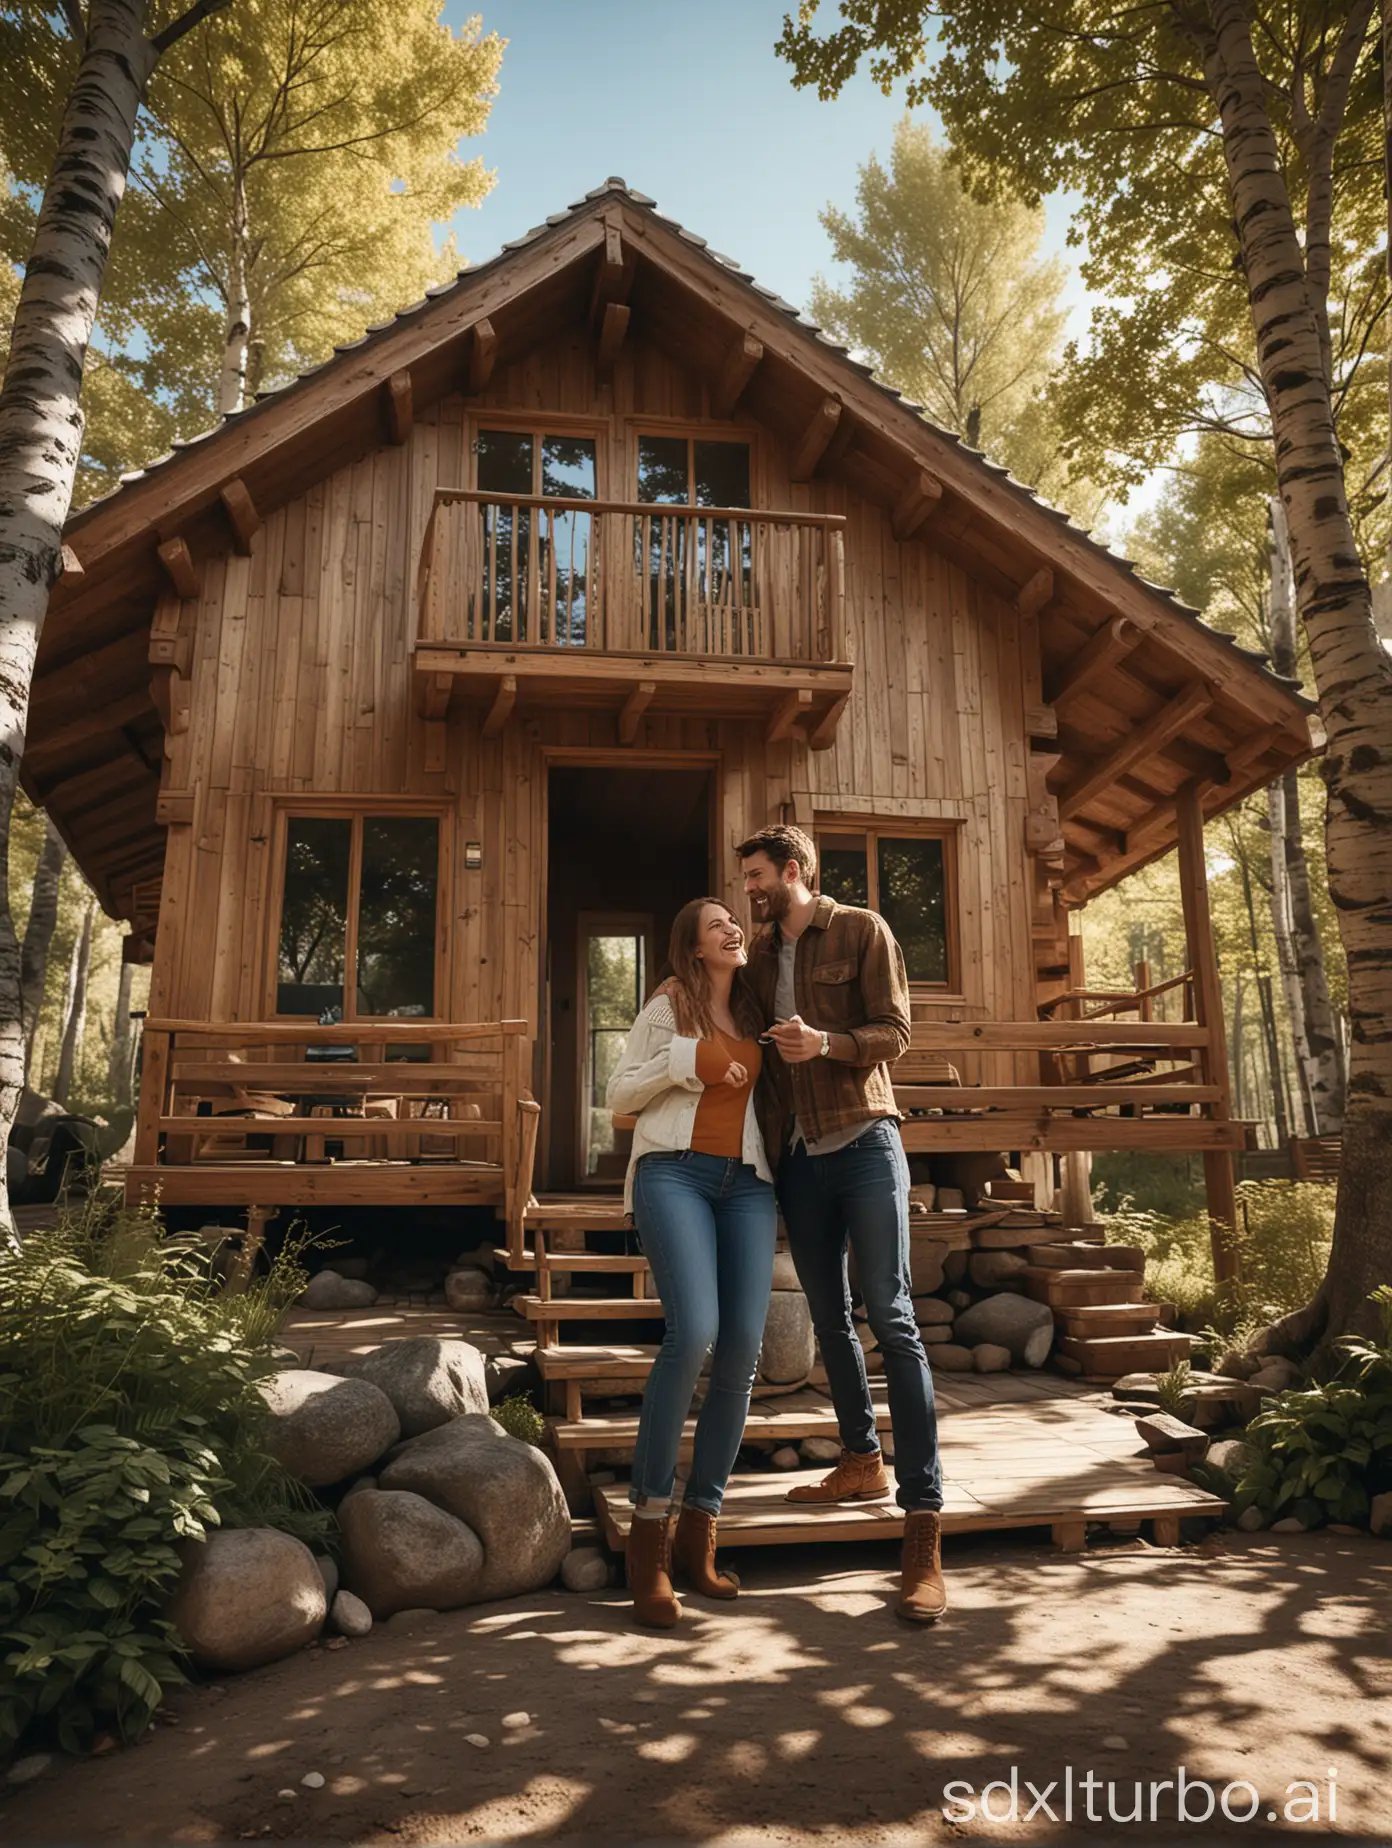 Couple laughing in the isolated chalet with the camera with a low angle of trees, texture and shaders with extremely detailed shadows generating pixels bordering on reality.